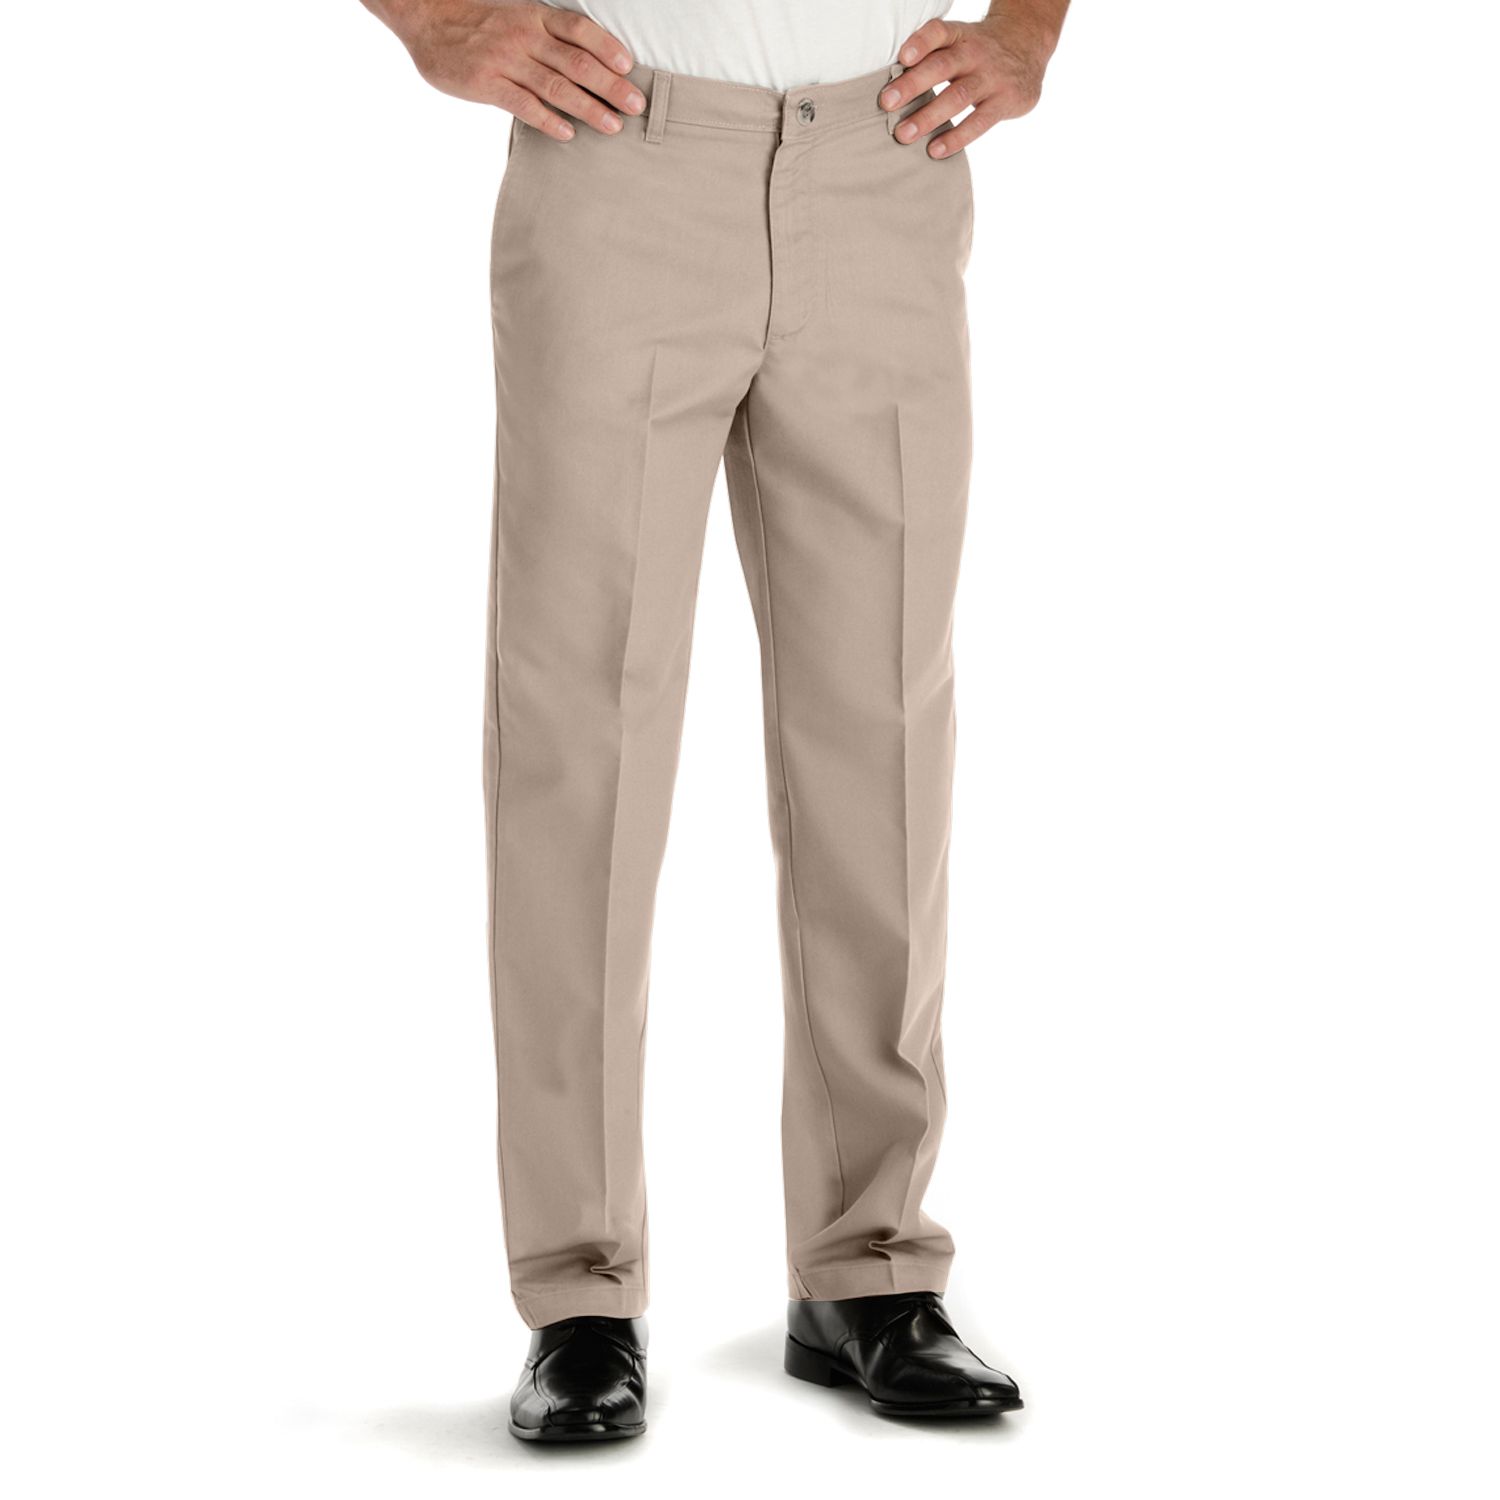 lee total freedom relaxed fit khaki